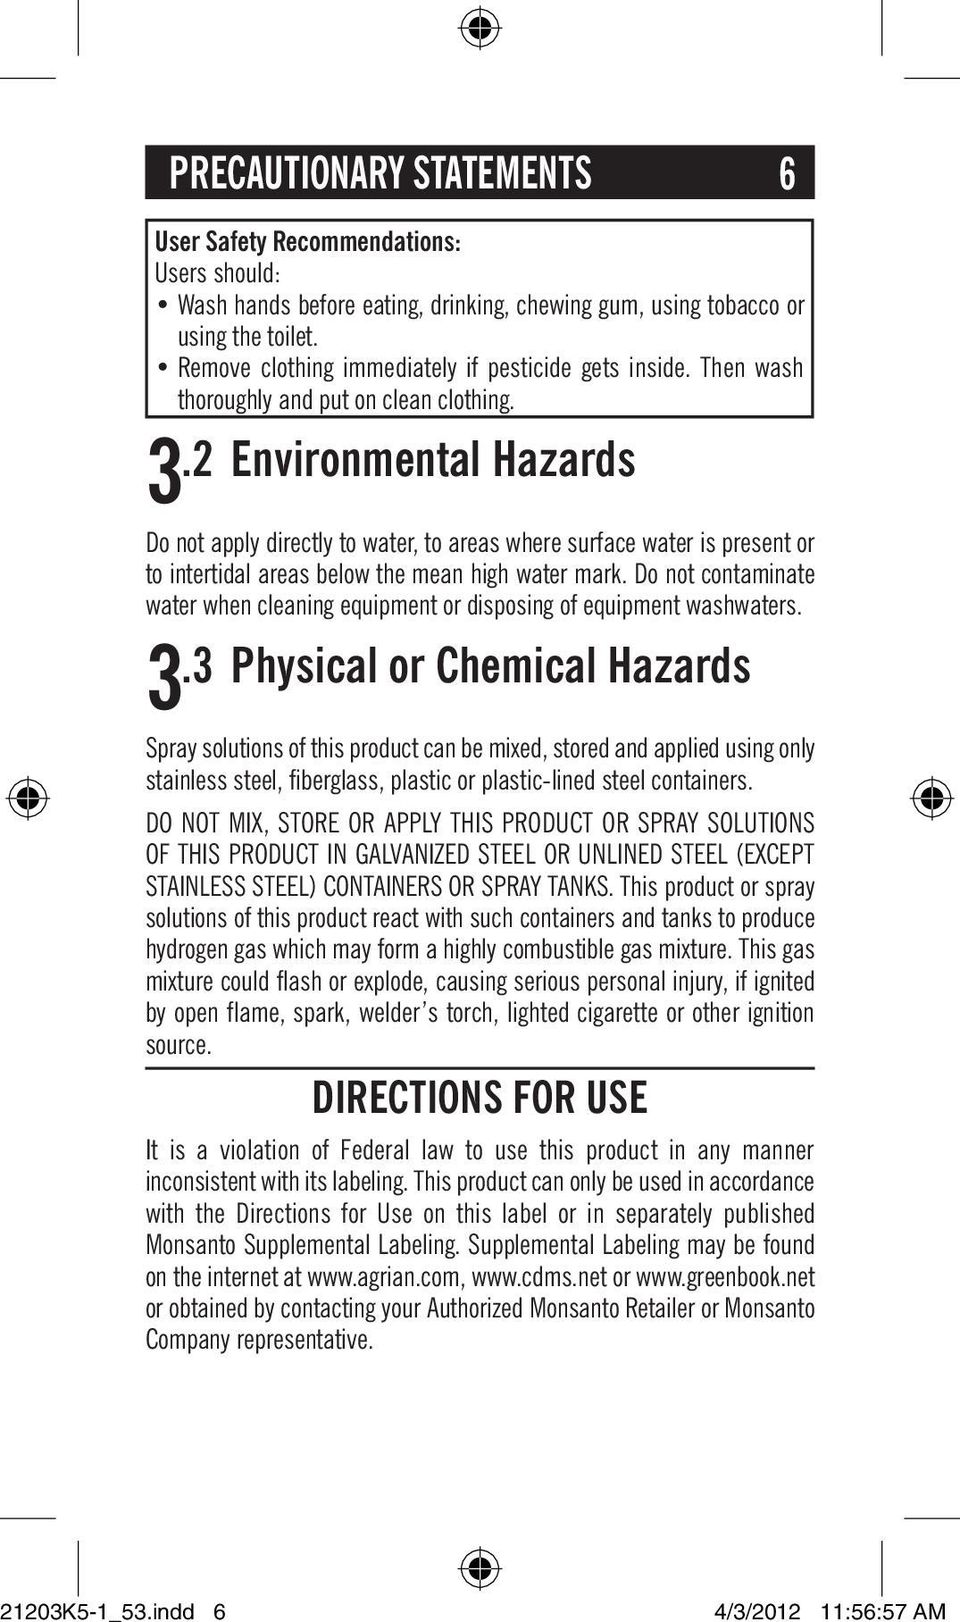 .2 Environmental Hazards 3 Do not apply directly to water, to areas where surface water is present or to intertidal areas below the mean high water mark.